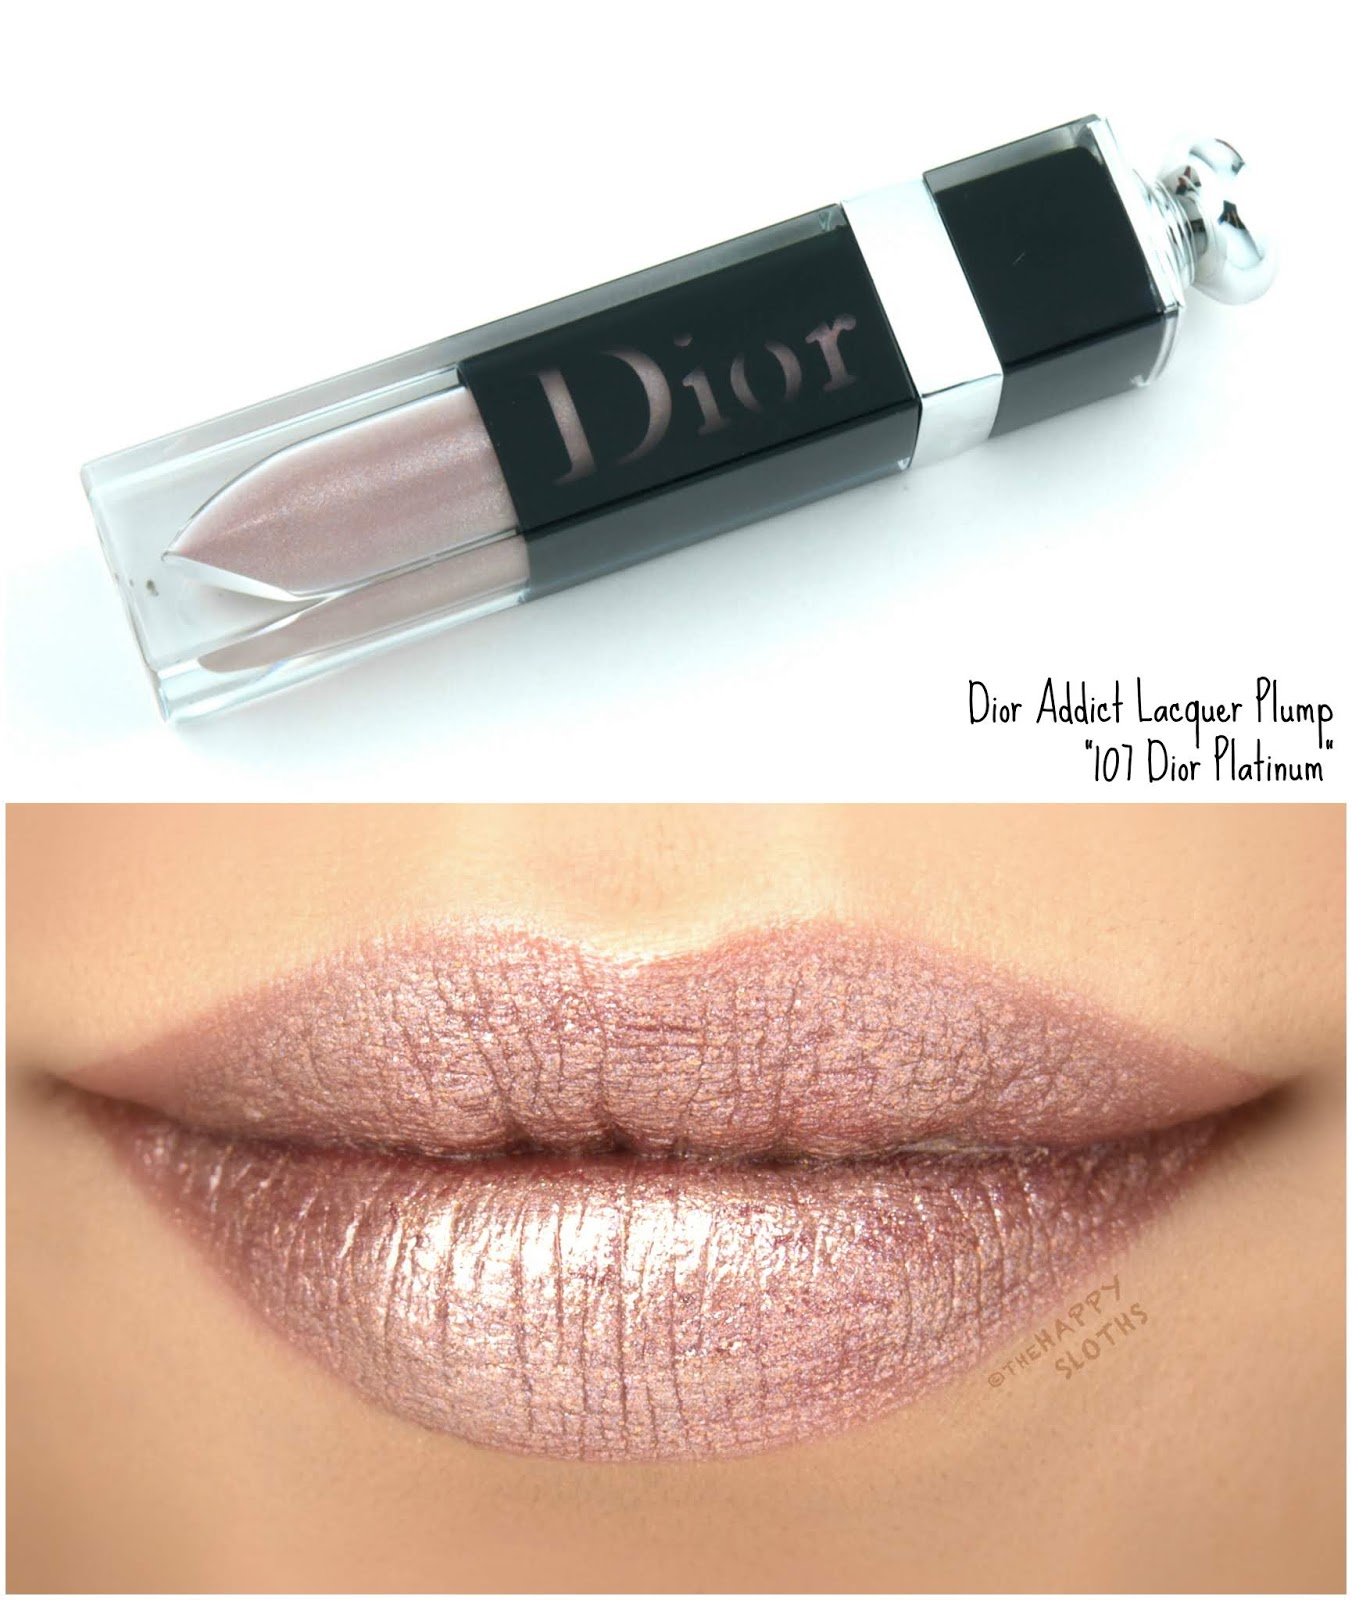 Dior | Dior Addict Lacquer Plump in "107 Dior Platinum": Review and Swatches